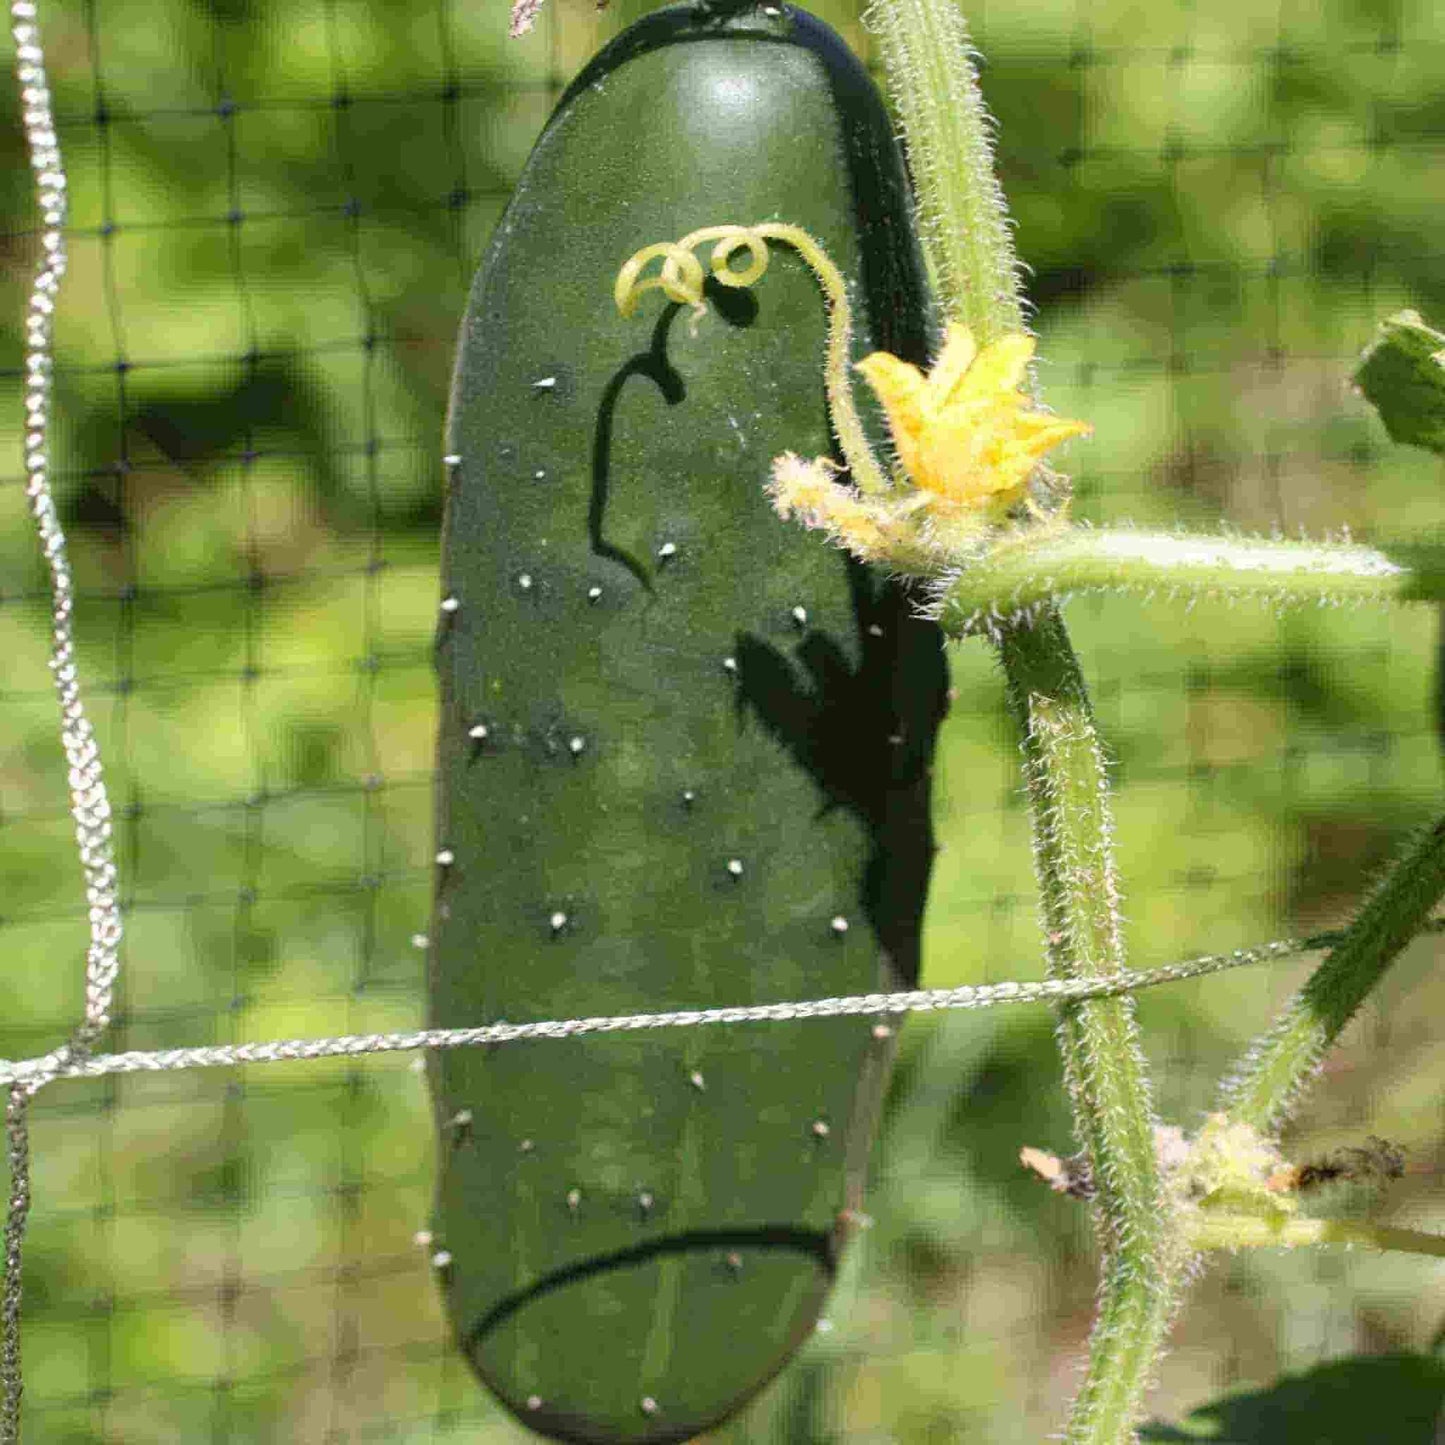 Slicer Cucumber Seeds from Ferry Morse Home Gardening